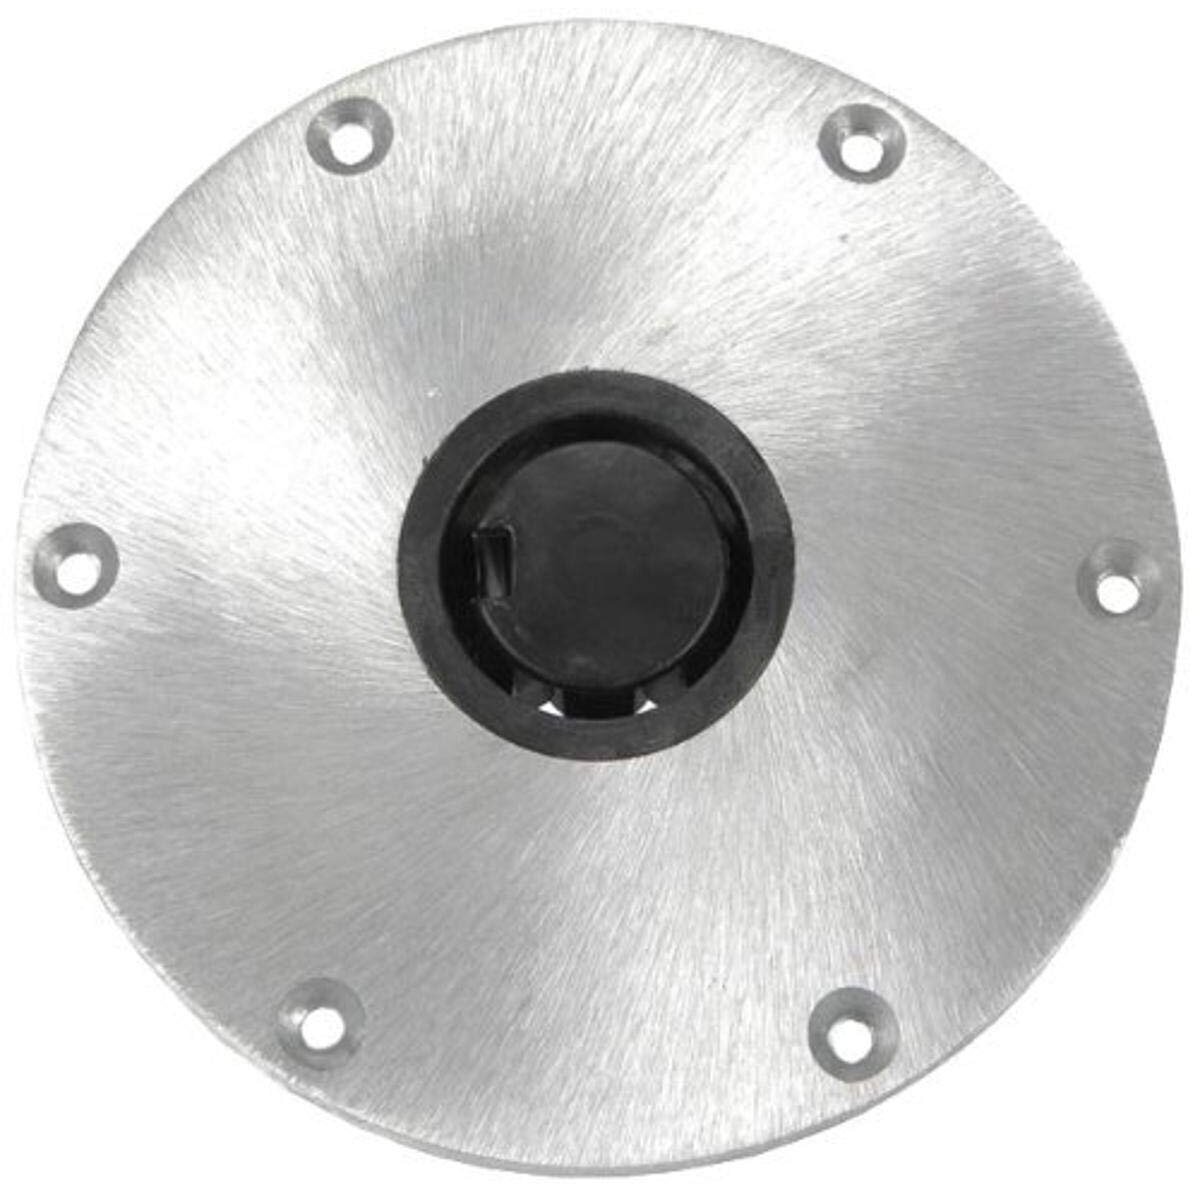 Springfield Marine 1300750-1 9"" Round Aluminum Base - for Plug-in Posts (3001.9830)